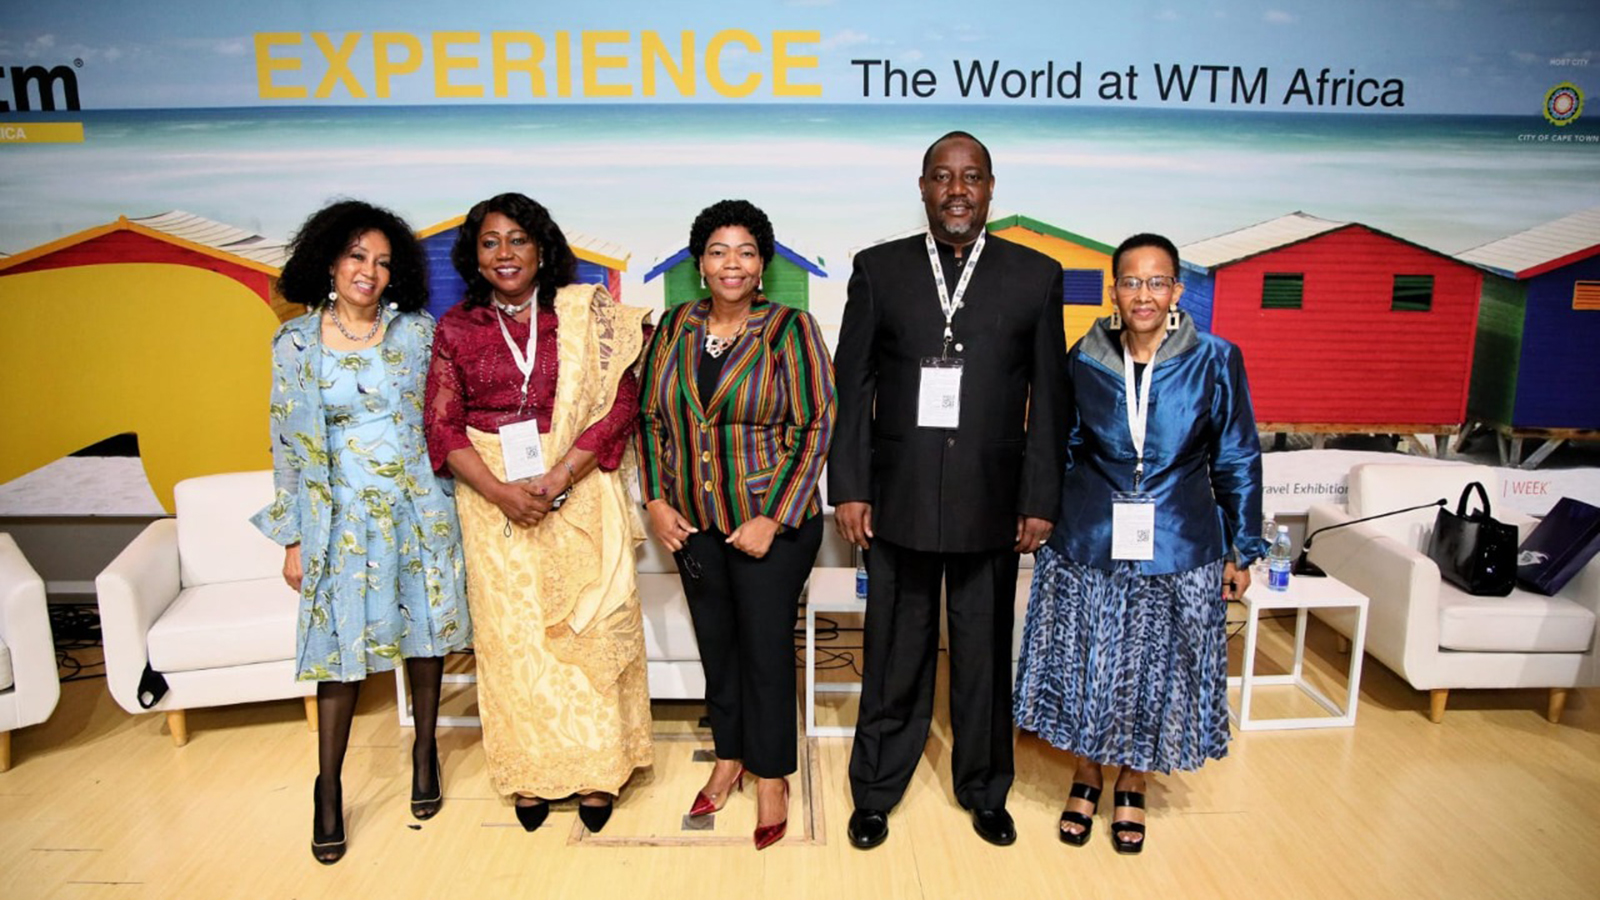 International Tourism and Investment Corporation ITIC WTM African Tourism Investment Summit 